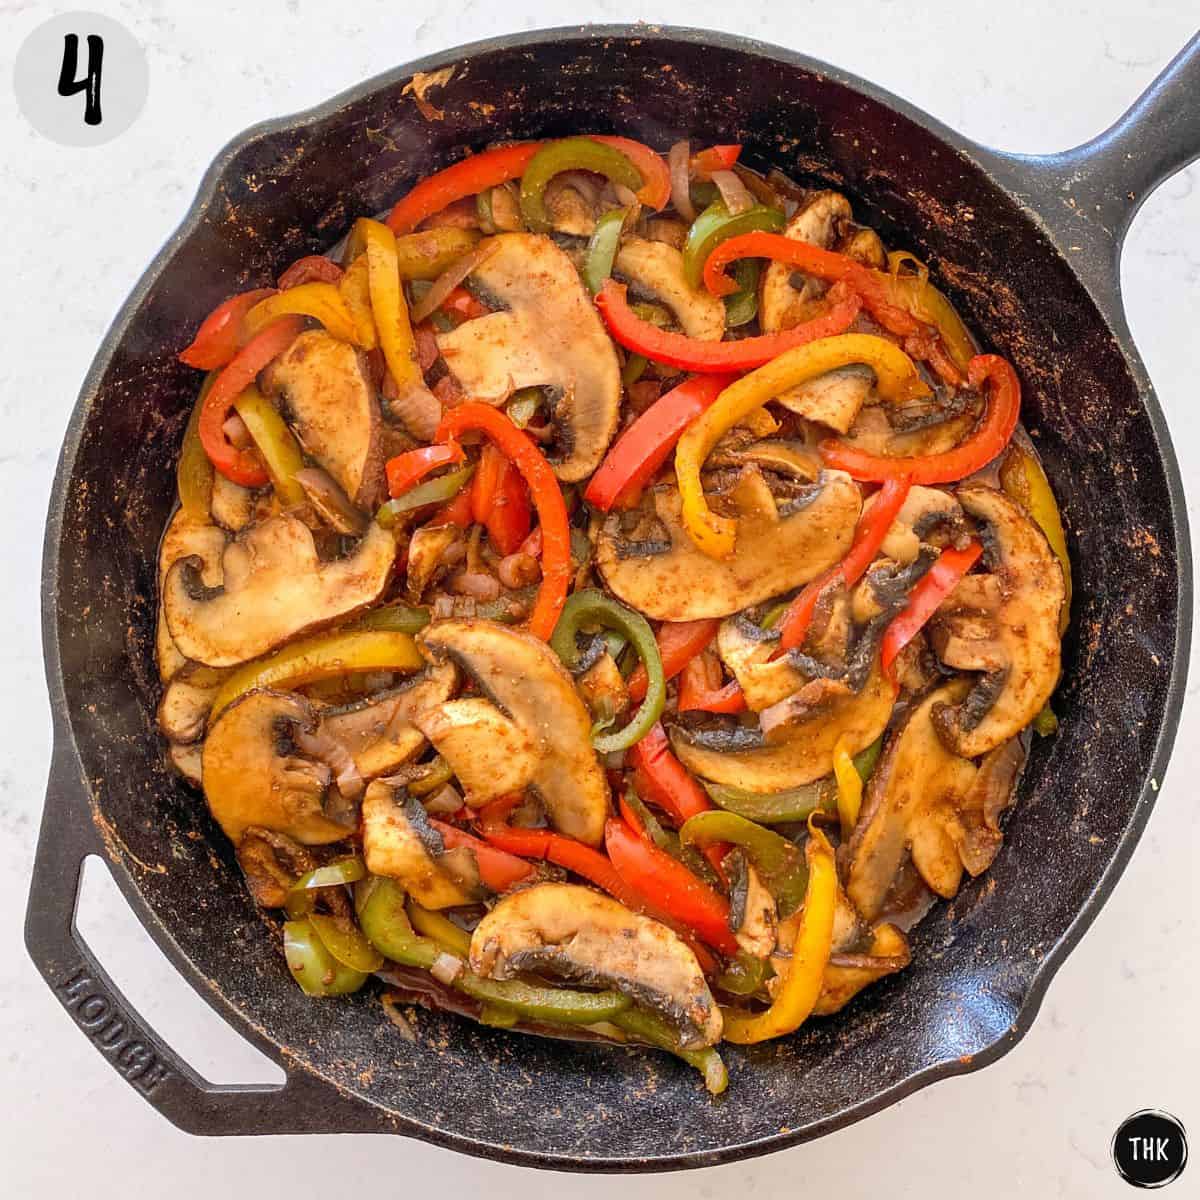 Sautéed mushrooms, peppers and onions in large cast iron skillet.